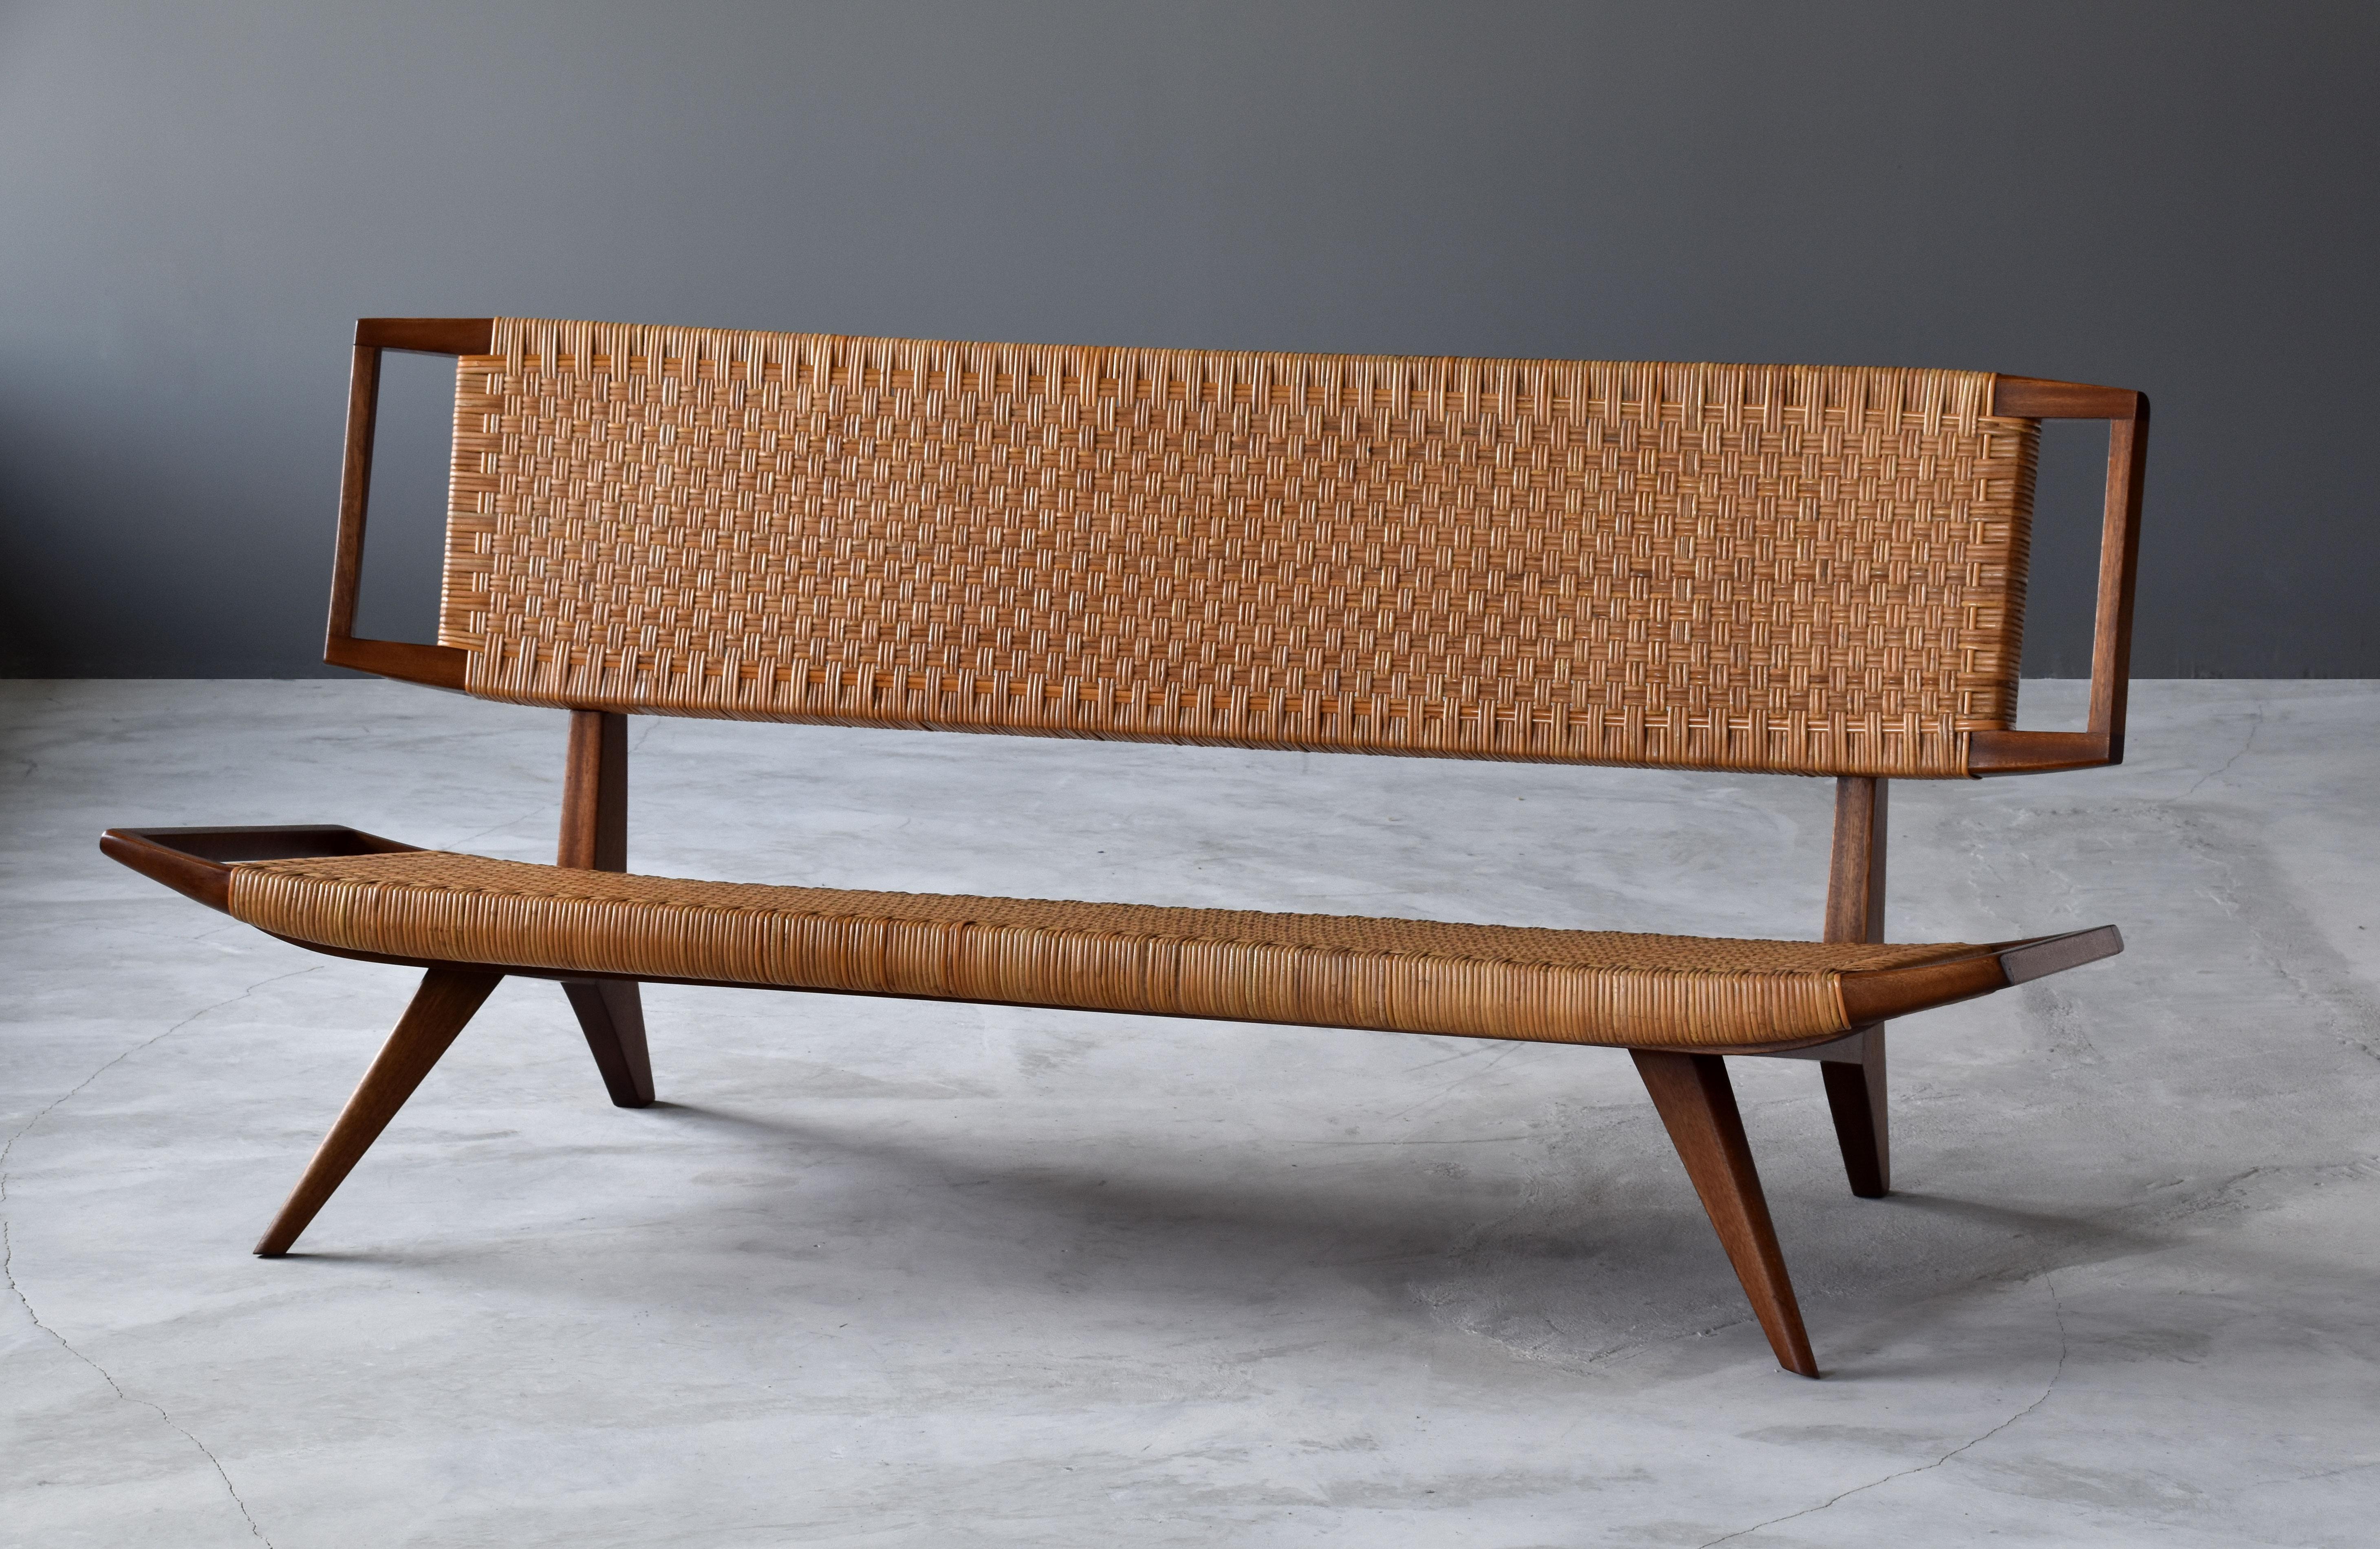 A sofa / settee / bench by Paul László for Glenn of California. Dark stained mahogany and original woven rattan / cane seat and back.

Paul László is considered among the most important California-based interior designer/architects of all time. At